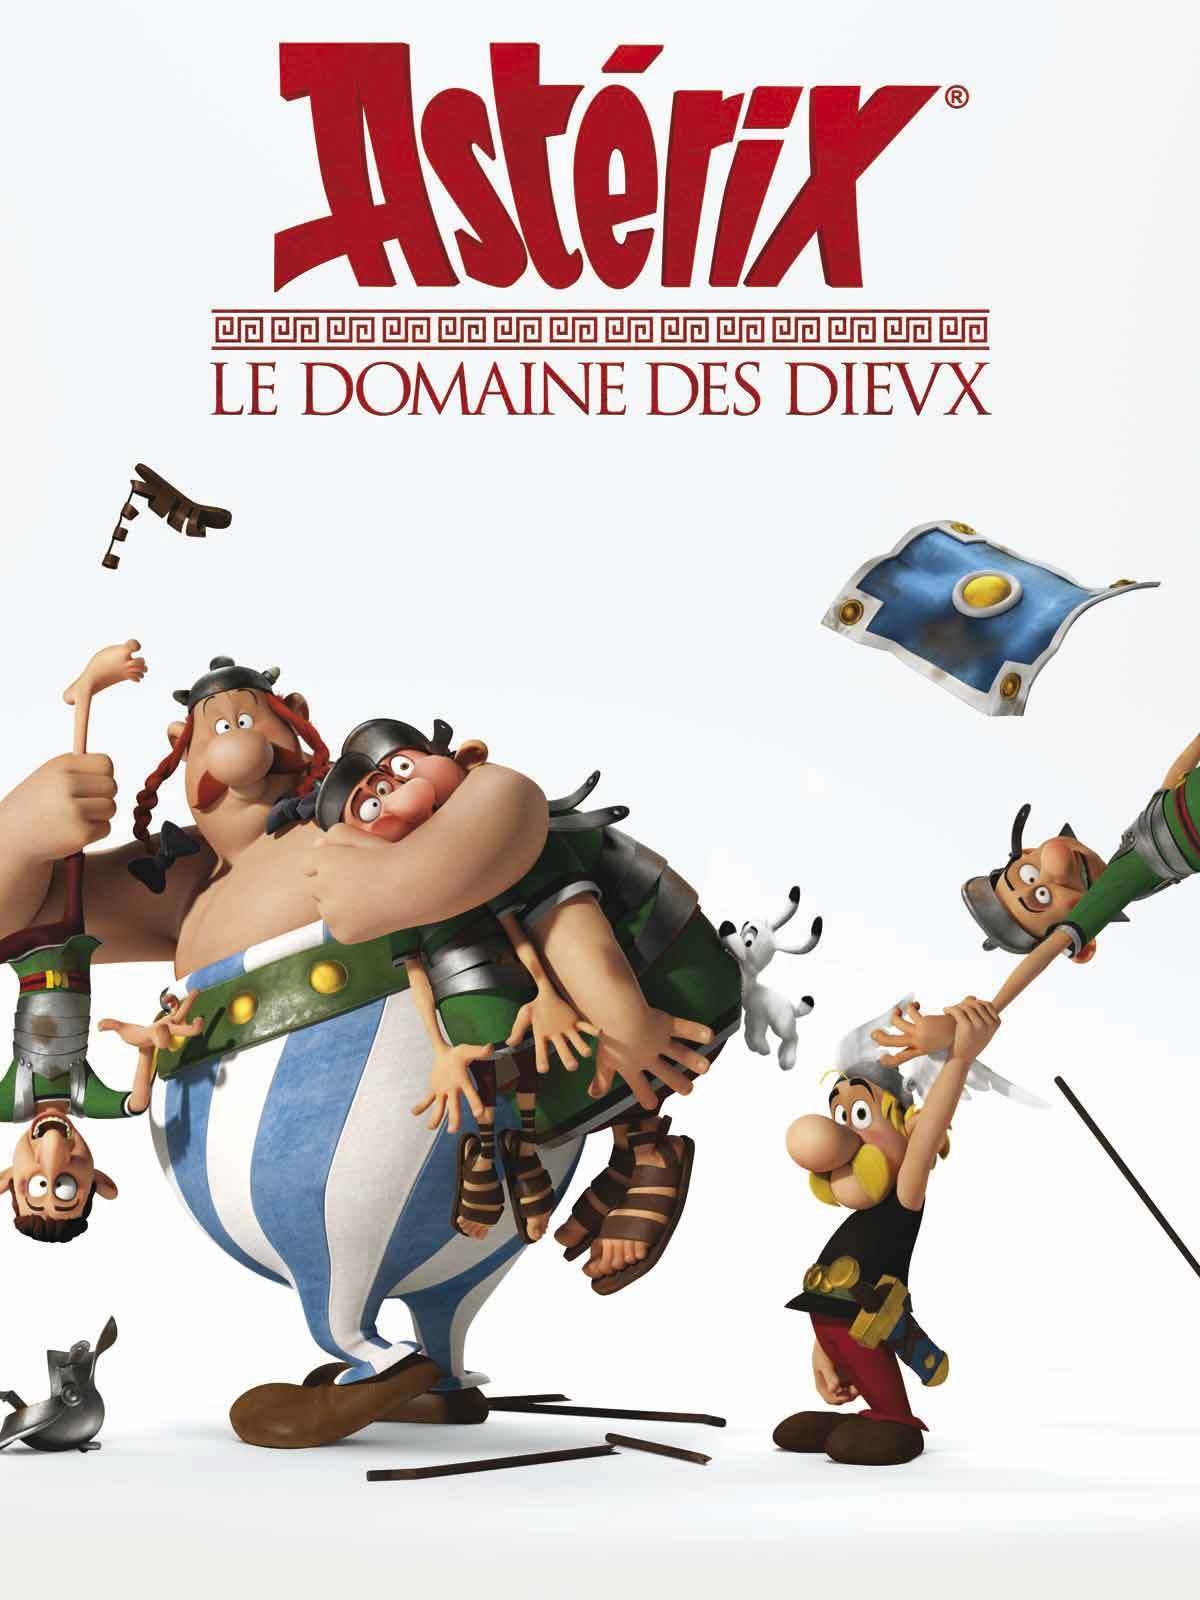 Asterix: The Land of the Gods 2014